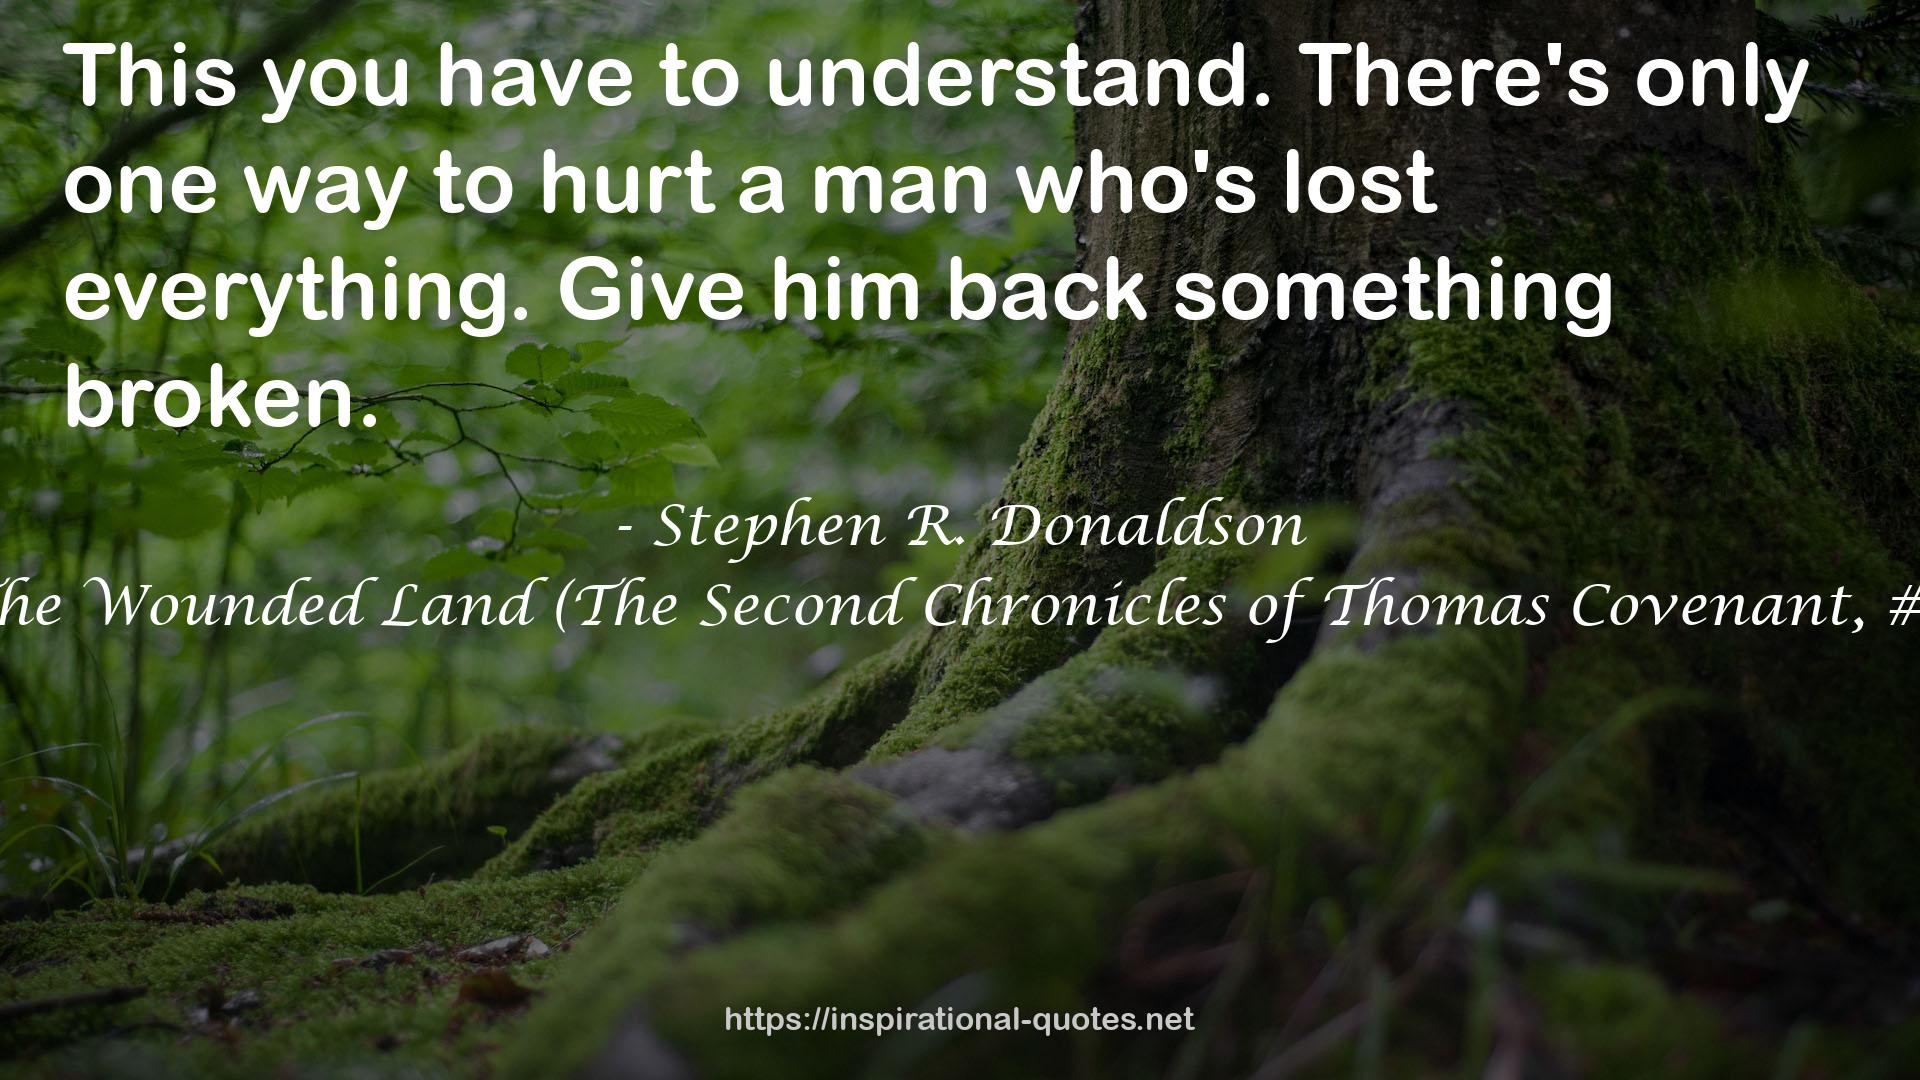 The Wounded Land (The Second Chronicles of Thomas Covenant, #1) QUOTES